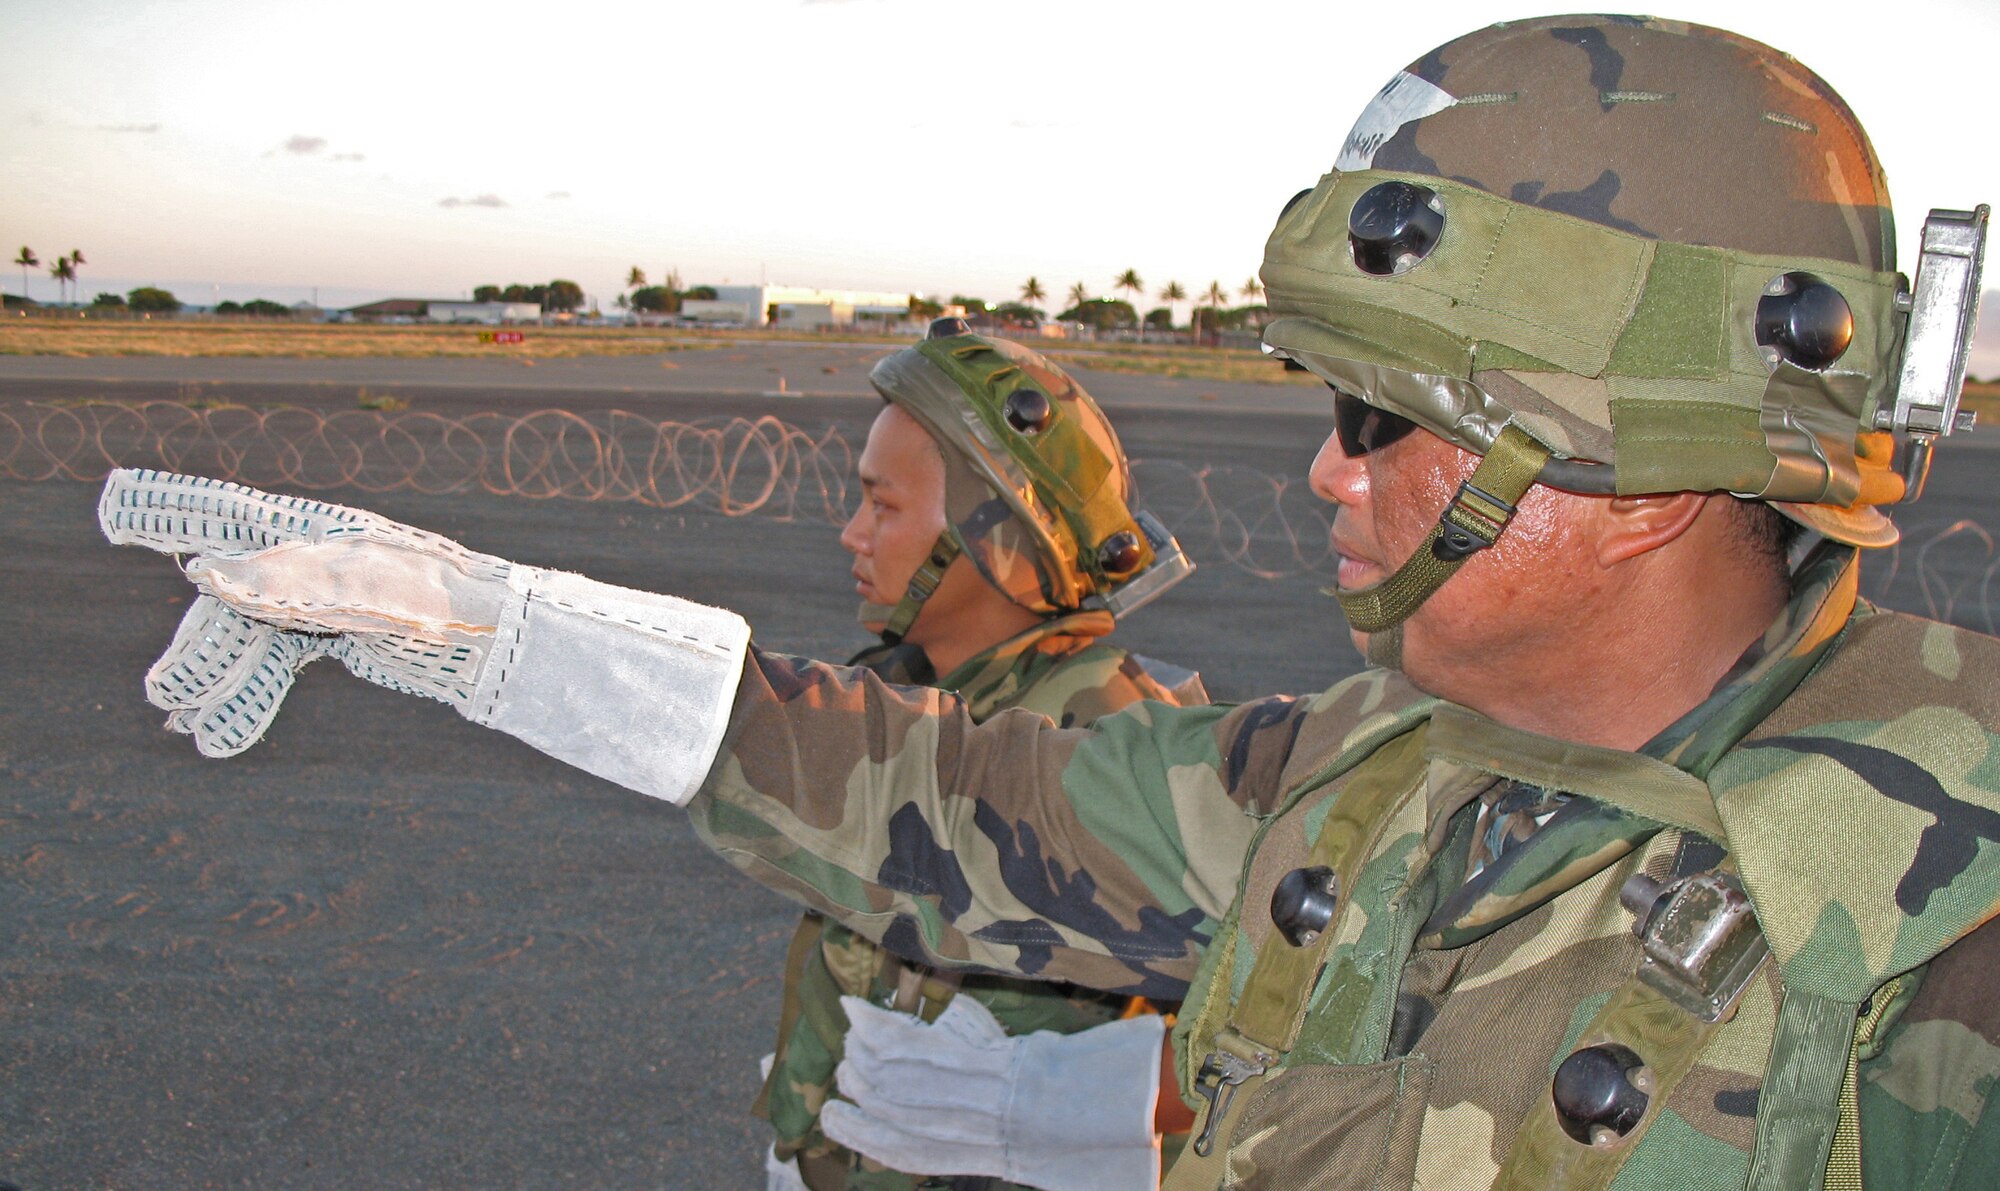 BARBER?S POINT, Hawaii -- Master Sgt. Rodney Arguilles points out holes in the razor wire fence as he and Senior Airman Pat Takenishi discuss base defense strategies during an exercise at Barber's Point, Hawaii, on 25 July, 2006.  Both Airmen are with the Hawaii Air National Guard's 297th Air Traffic Control Squadron.  (US Air Force photo by Tech. Sgt. Chris Vadnais)